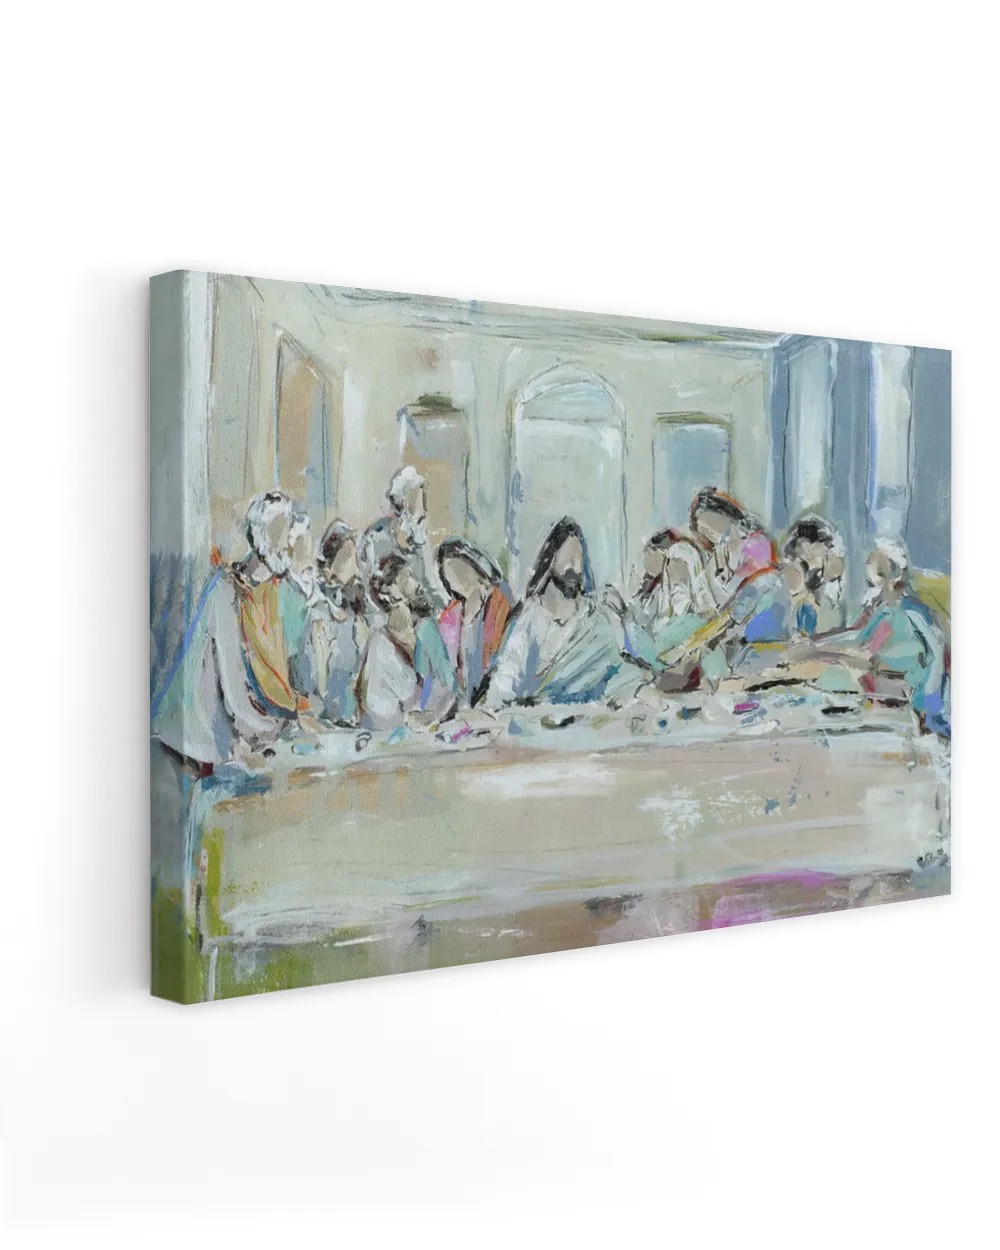 Last Supper Wall Art 9 - Last Supper Wall Decor - Best Wrapped Canvas For Dining Room - Jesus Canvas